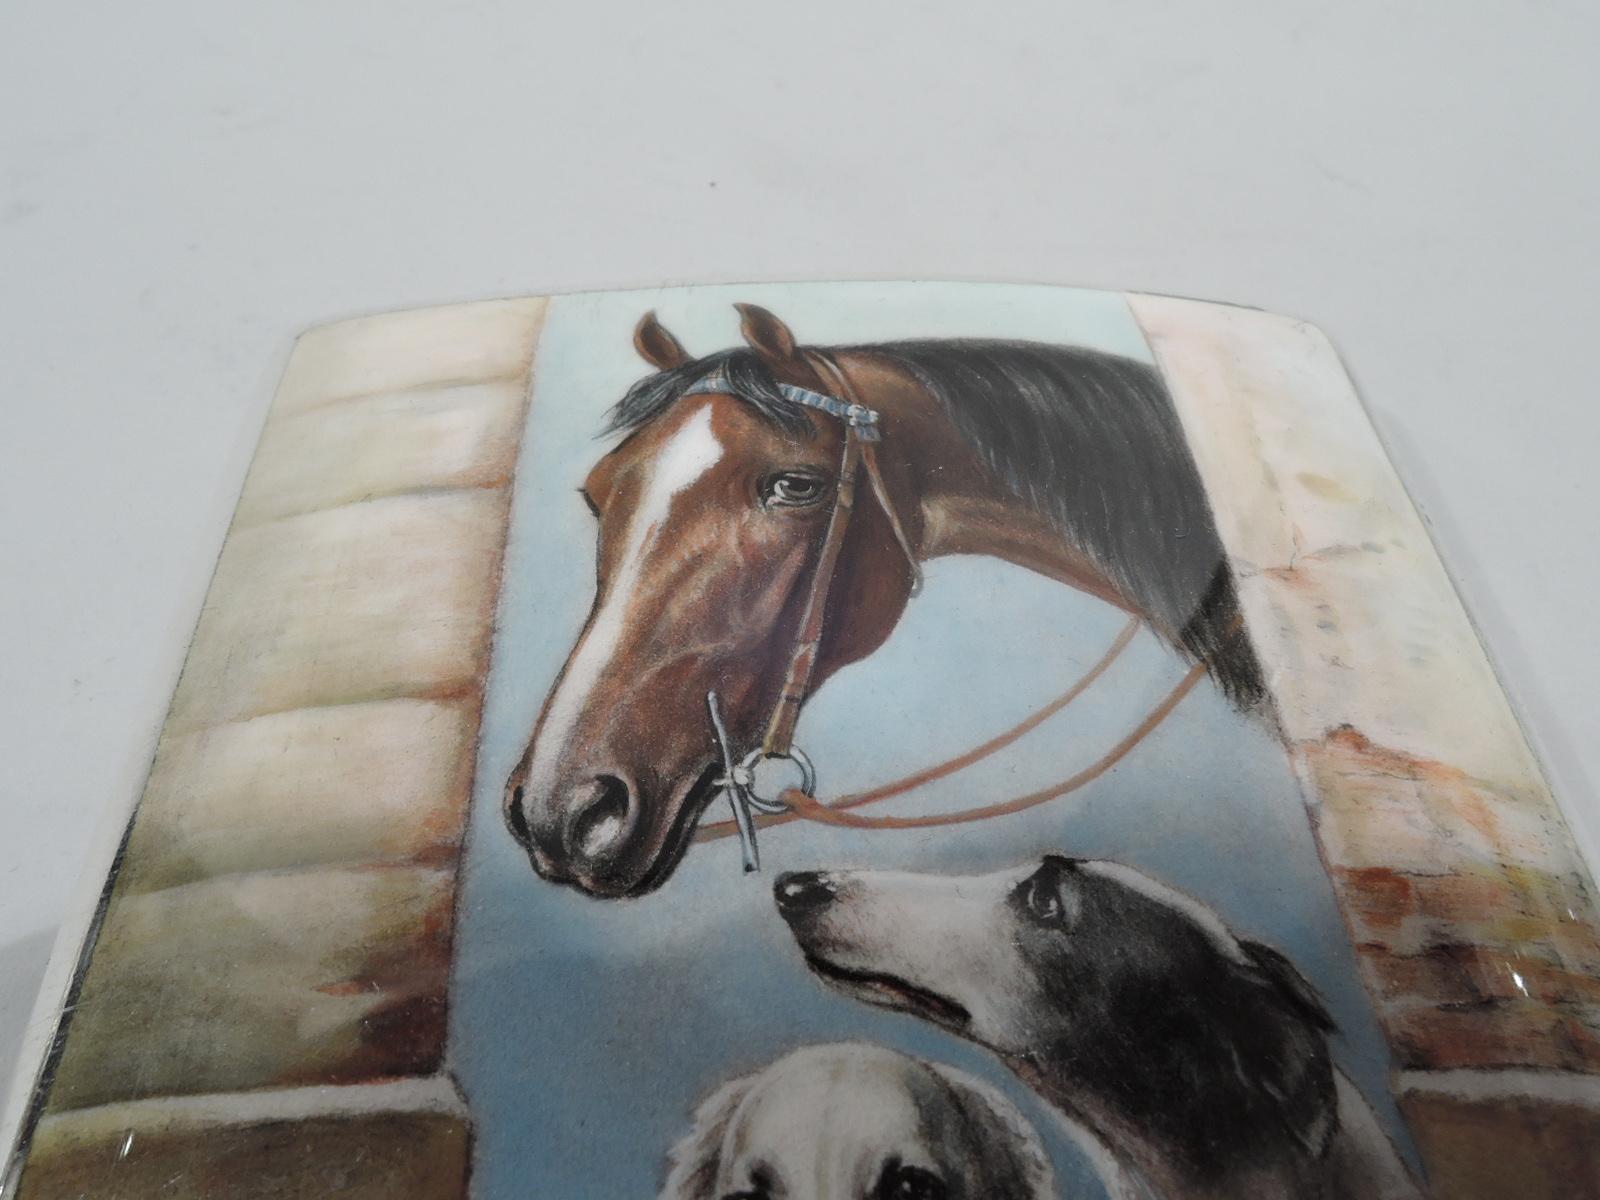 European silver and enamel cigarette case, ca 1920. Rectangular, curved, and hinged. On cover, a horse’s head appears in an entryway, with two protective borzoi dogs standing guard. Stable drama against a semi-abstract background of brick and stone,